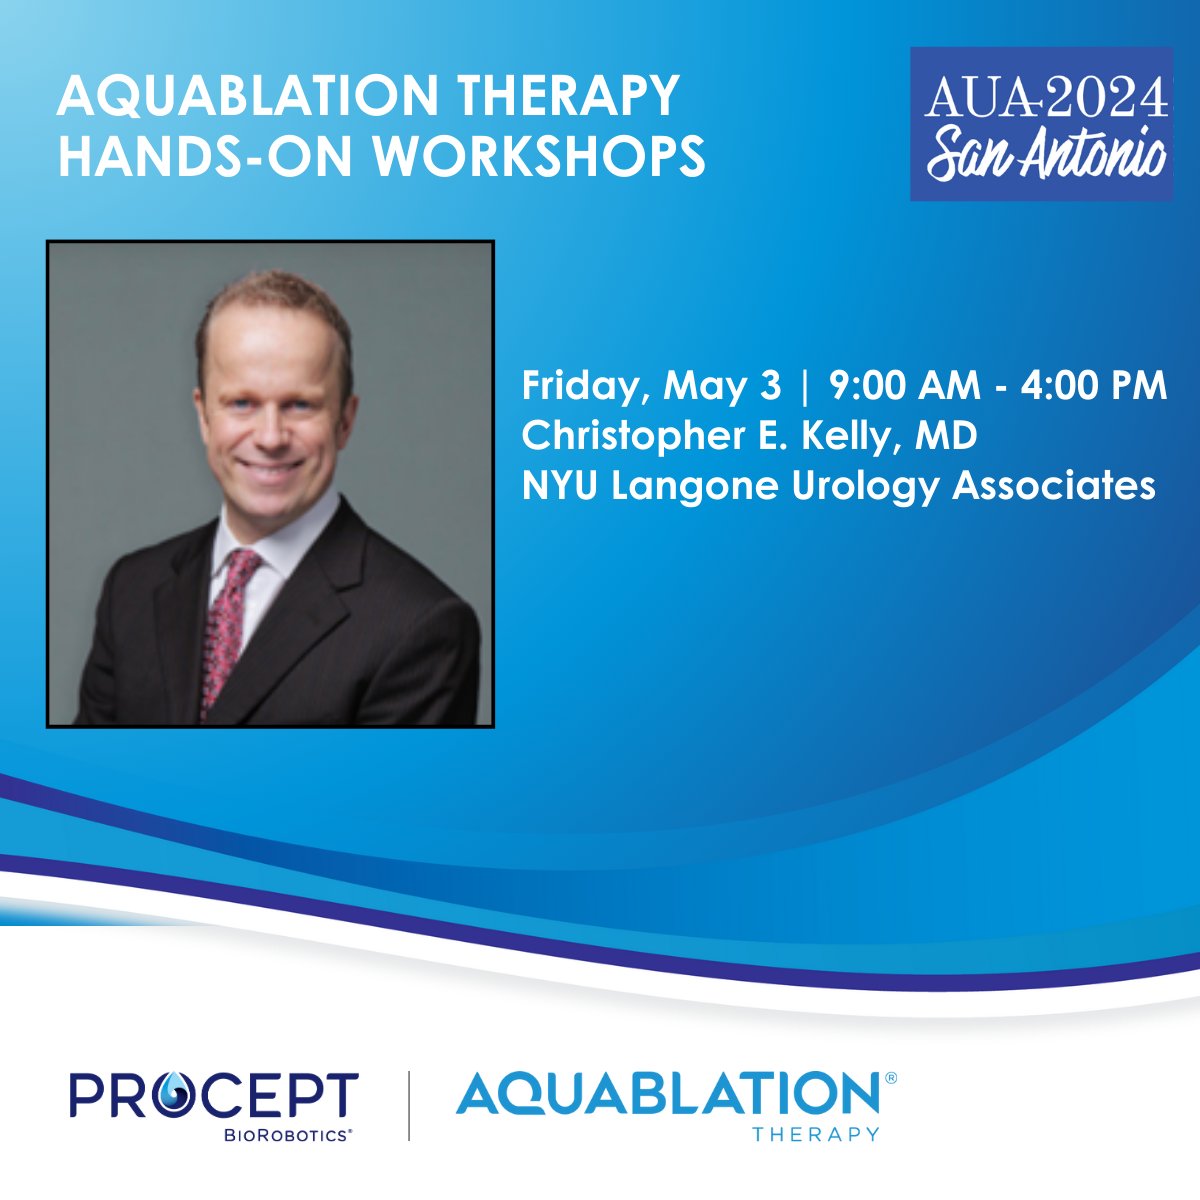 Join me at the Procept BioRobotics Hands-On Workshops! It's a fantastic chance for surgeons interested in #Aquablationtherapy to get hands-on experience with the robotic system and engage with peers like me who actively perform Aquablation therapy.